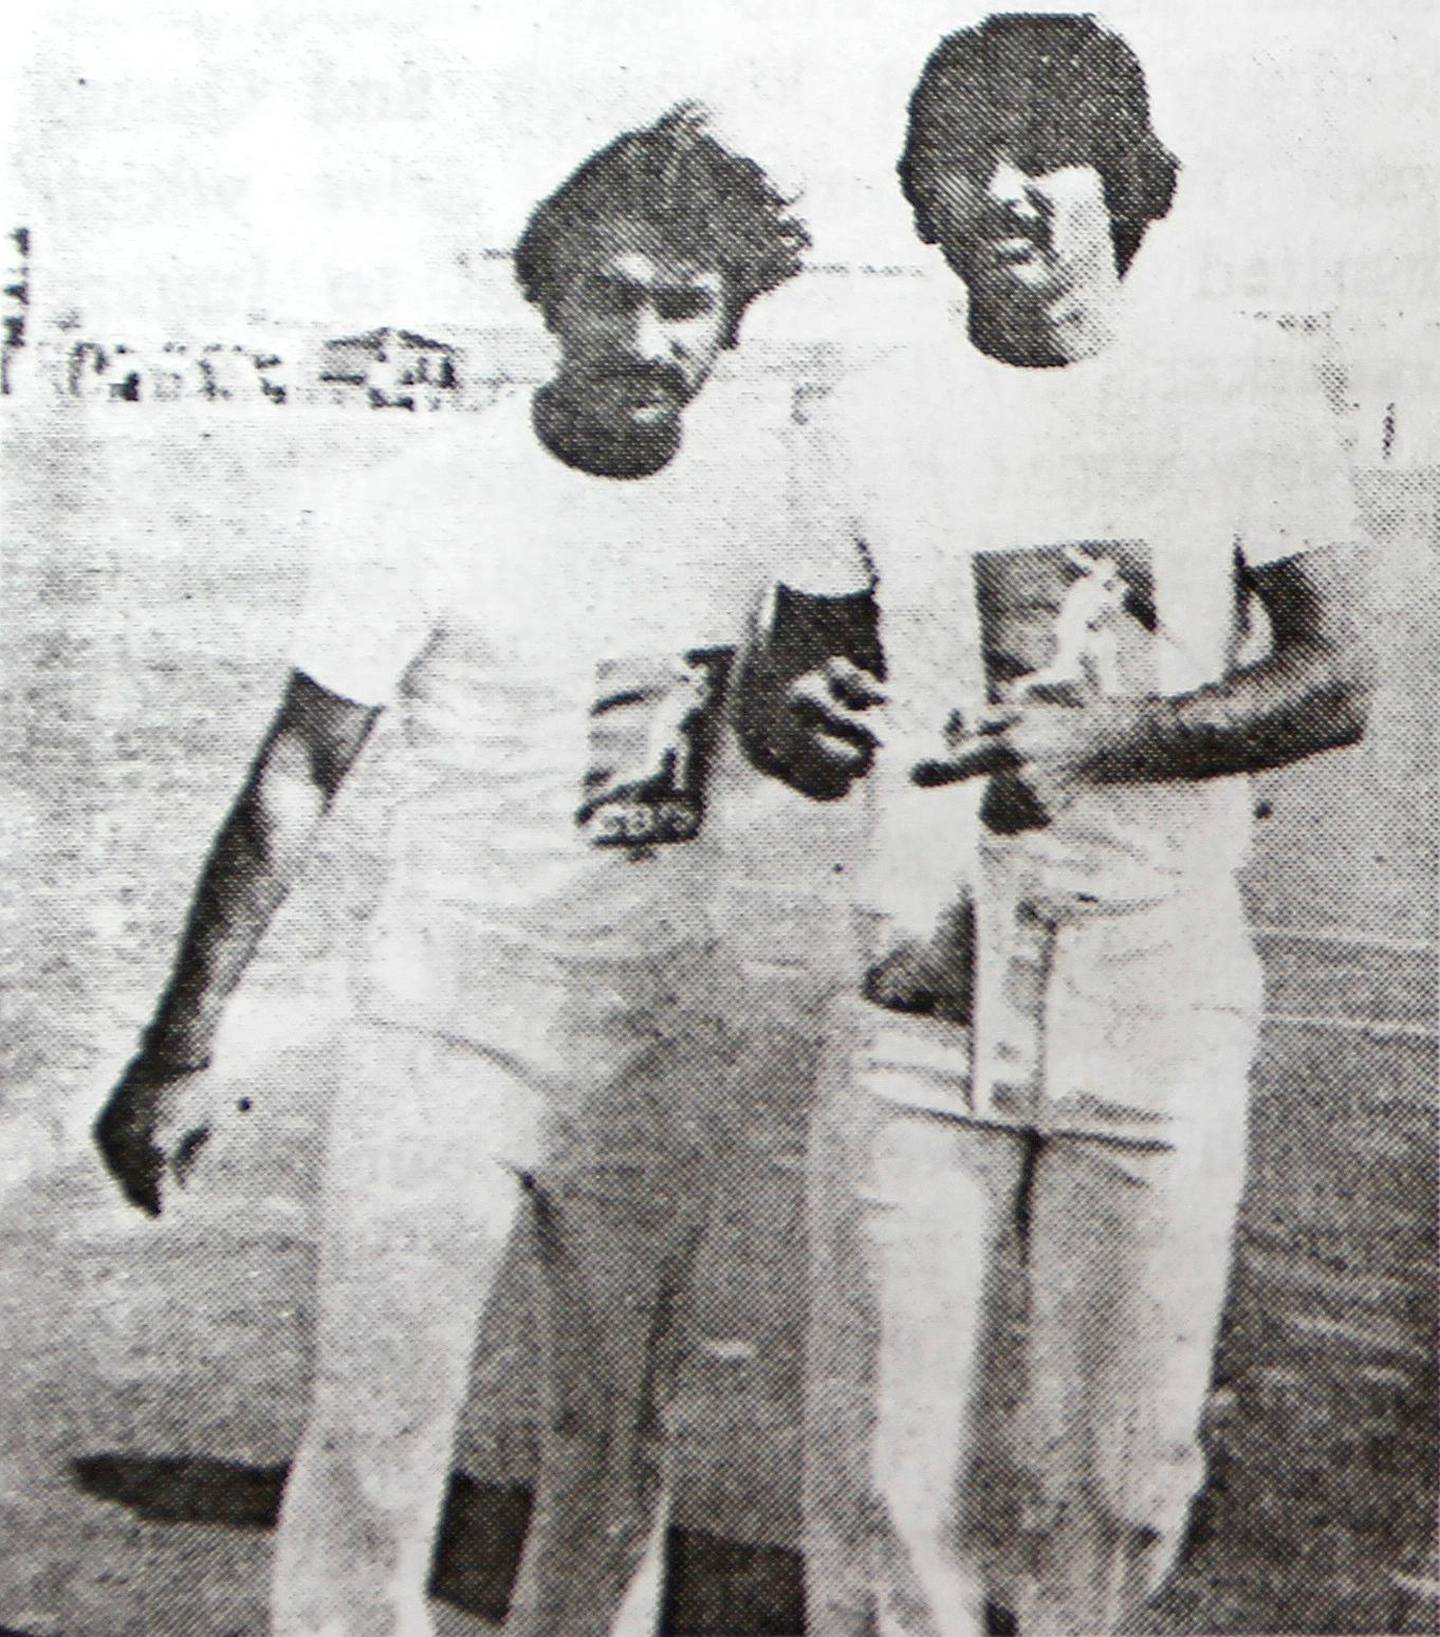 FOR SPORT MEMORY LANE SERIES - The two captains after the toss during a match between Gavaskar XI and Miandad XI at Sharjah Cricket Stadium, April 3 1981. Photo Courtesy: The Cricketer Pakistan *** Local Caption ***  9.jpg